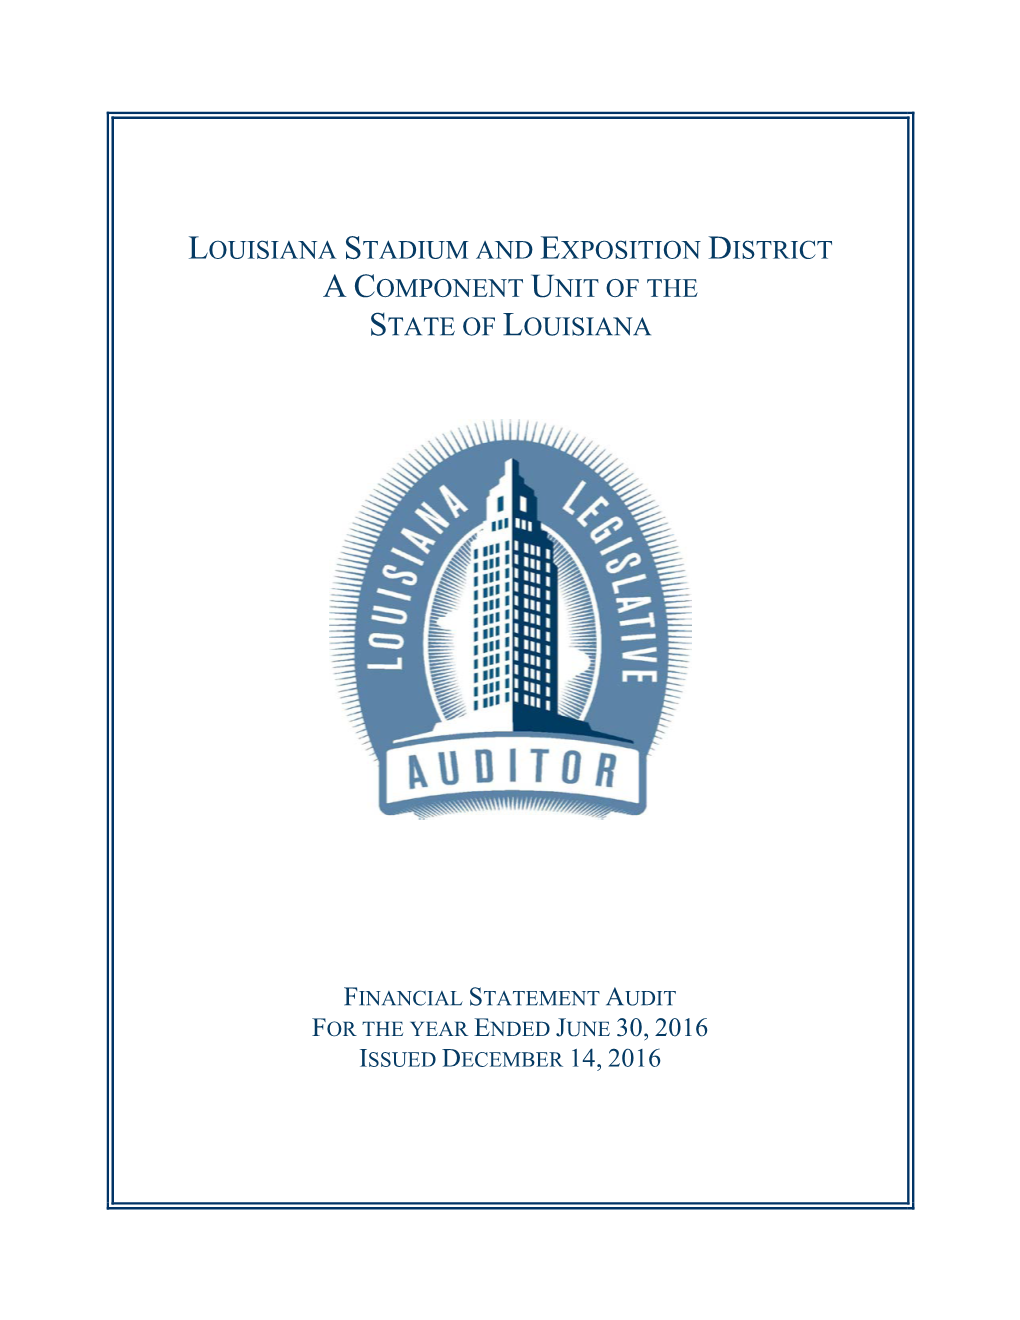 Louisiana Stadium and Exposition District a Component Unit of the State of Louisiana